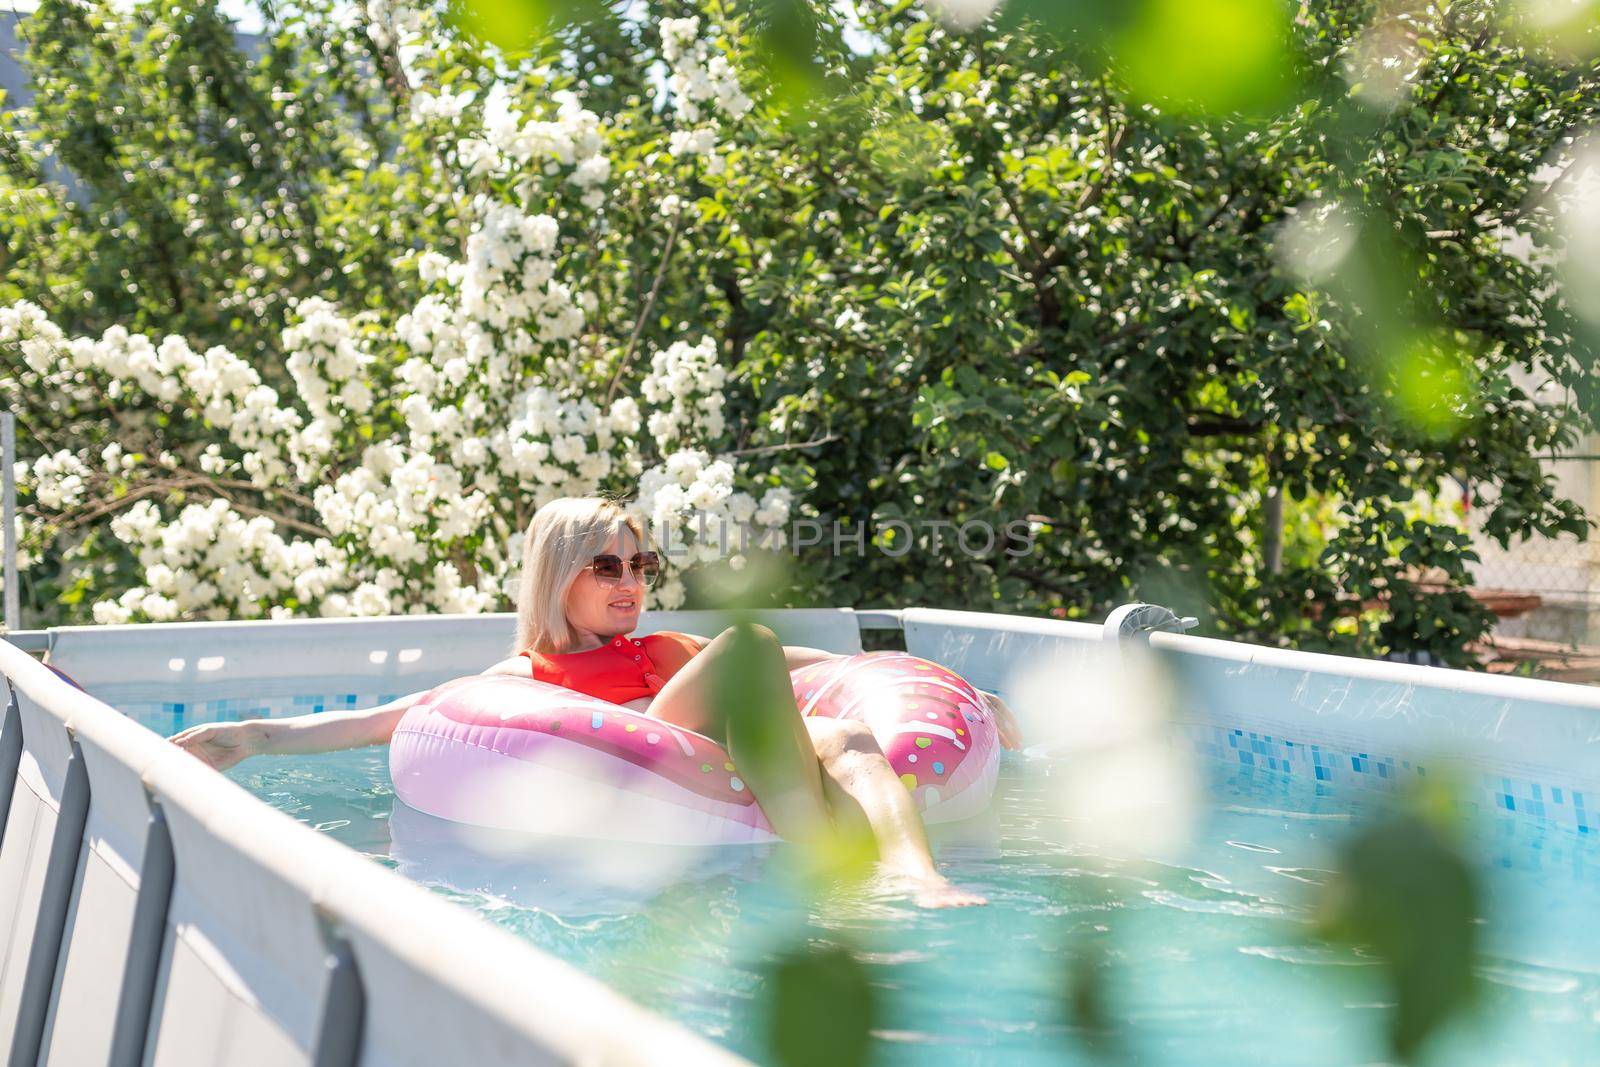 The young beautiful woman swims in the pool in a garden